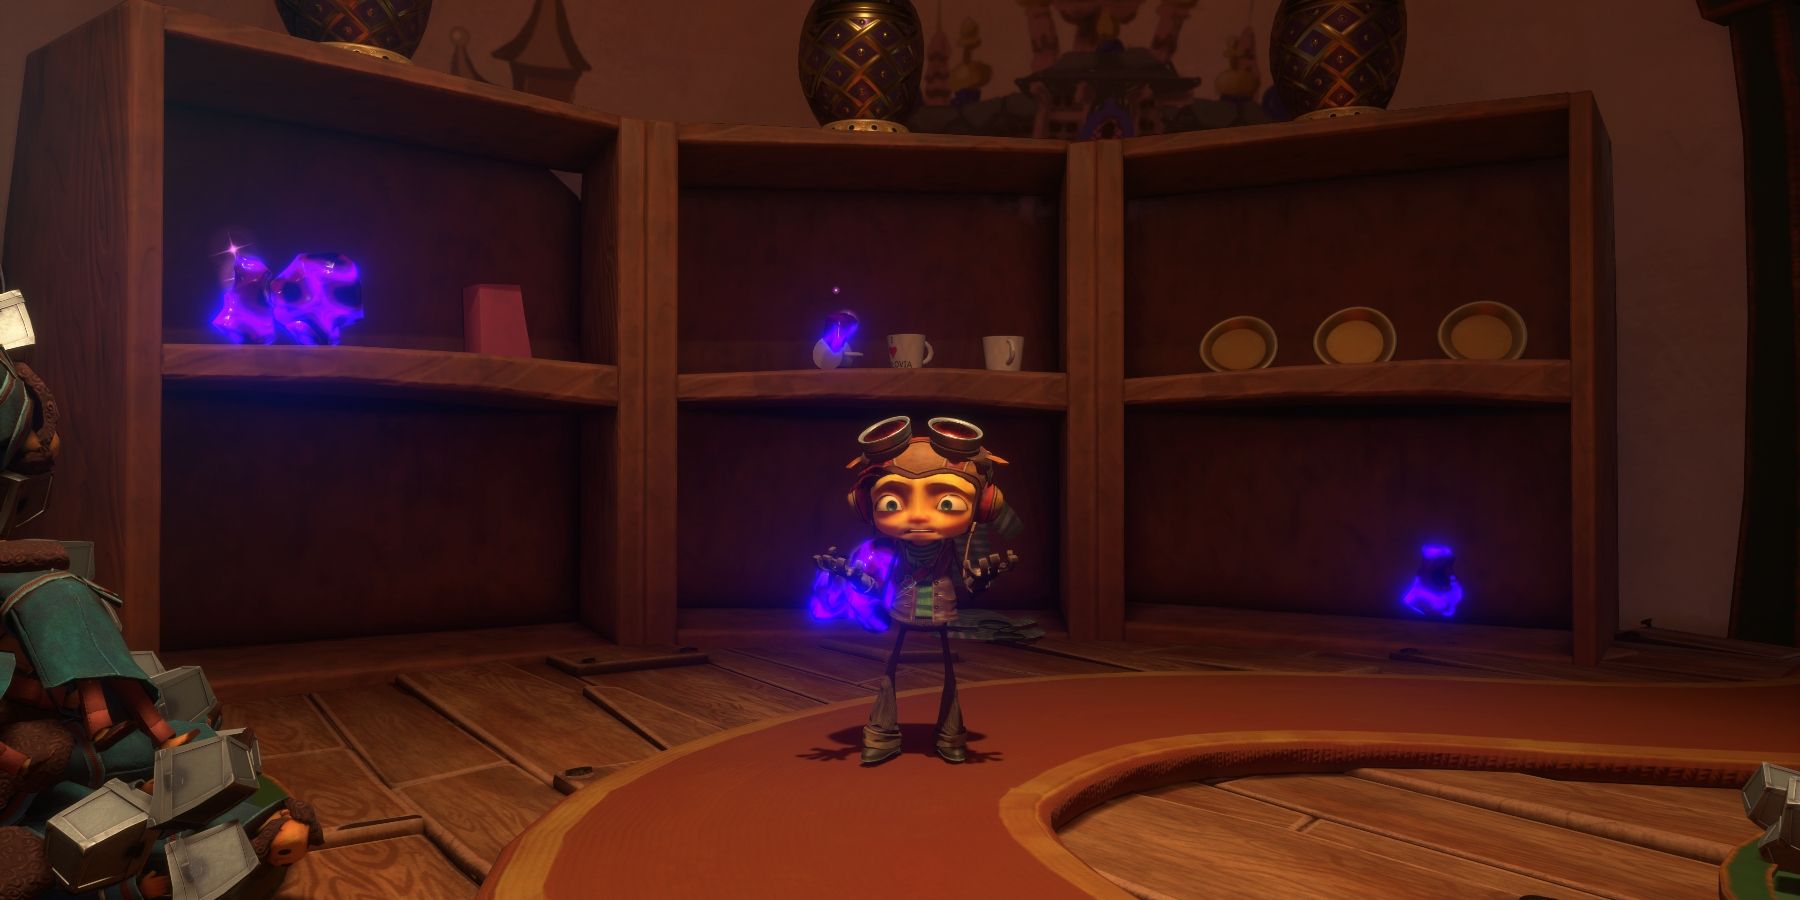 A boy shrugs in confusion in front of a cabinet filled with glowing purple rocks